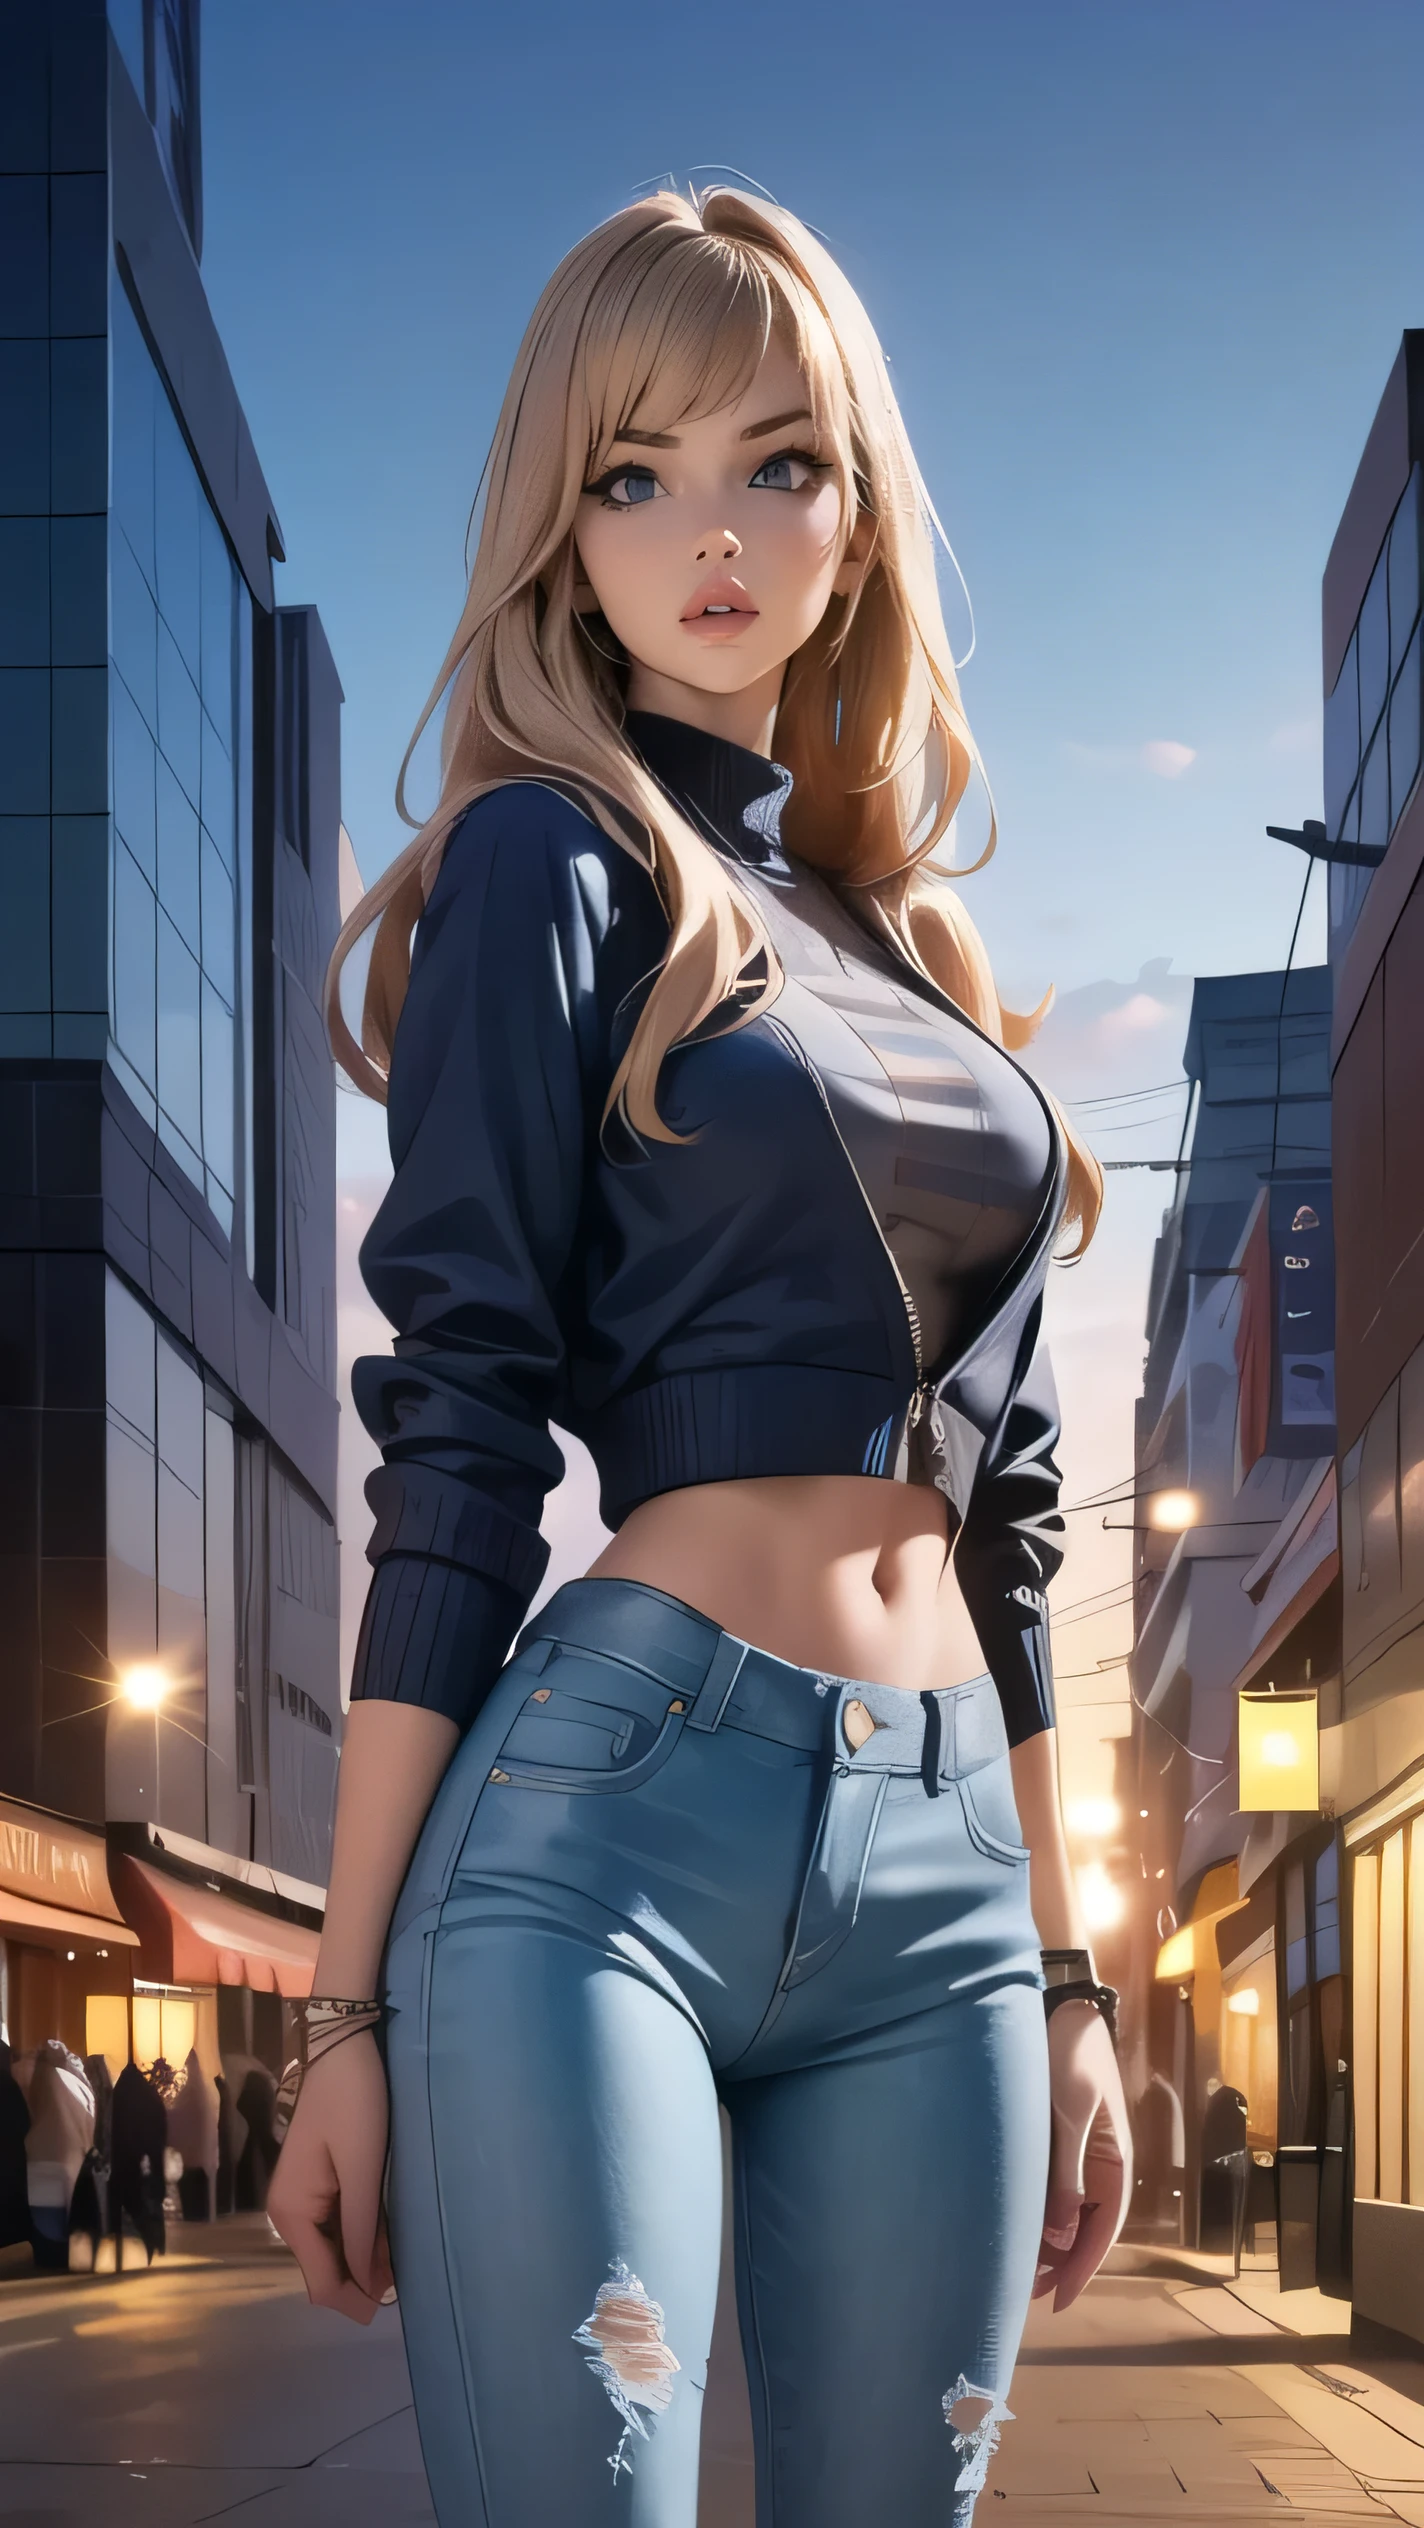 1girl,(wearing sweater and fashionablelong jacket and jeans:1.2),(RAW photo, best quality), (realistic, photo-realistic:1.4), masterpiece, an extremely delicate and beautiful, extremely detailed, 2k wallpaper, Amazing, finely detail, extremely detailed CG unity 8k wallpaper, ultra-detailed, highres, soft light, beautiful detailed girl, extremely detailed eyes and face, beautiful detailed nose, beautiful detailed eyes,cinematic lighting,at a park,city lights at night,perfect anatomy,slender body,